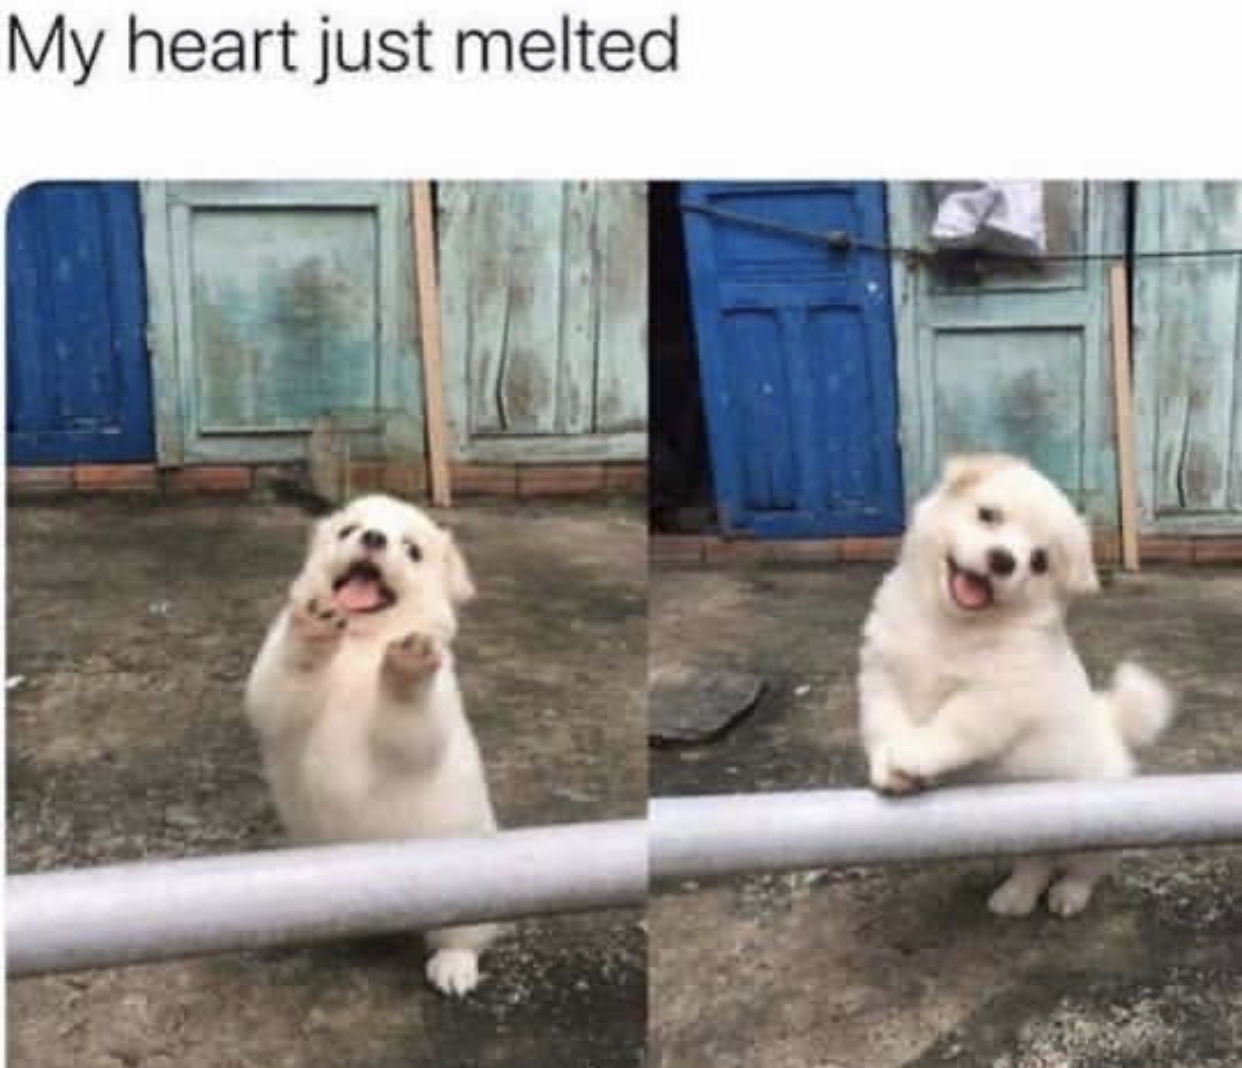 wholesome meme - My heart just melted